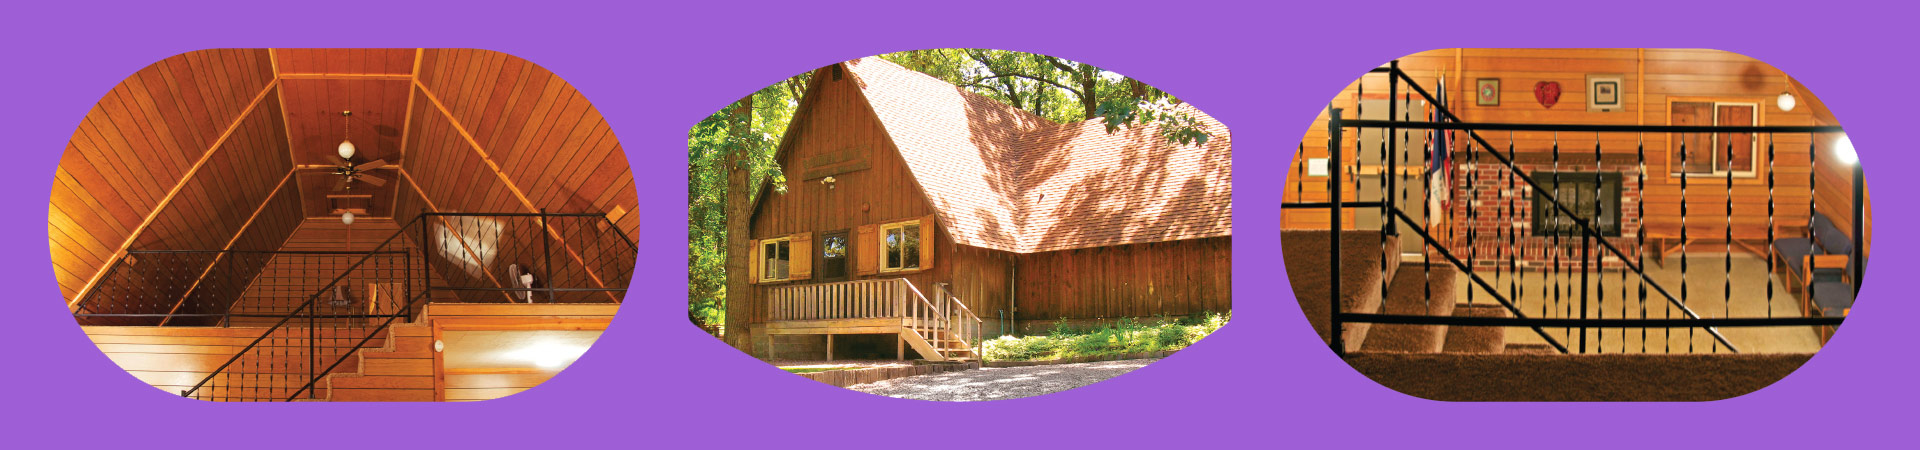  a bright purple banner with photos of a wooden sleeping loft, rustic wooden cabin, and stairs overlooking a cozy fireplace 